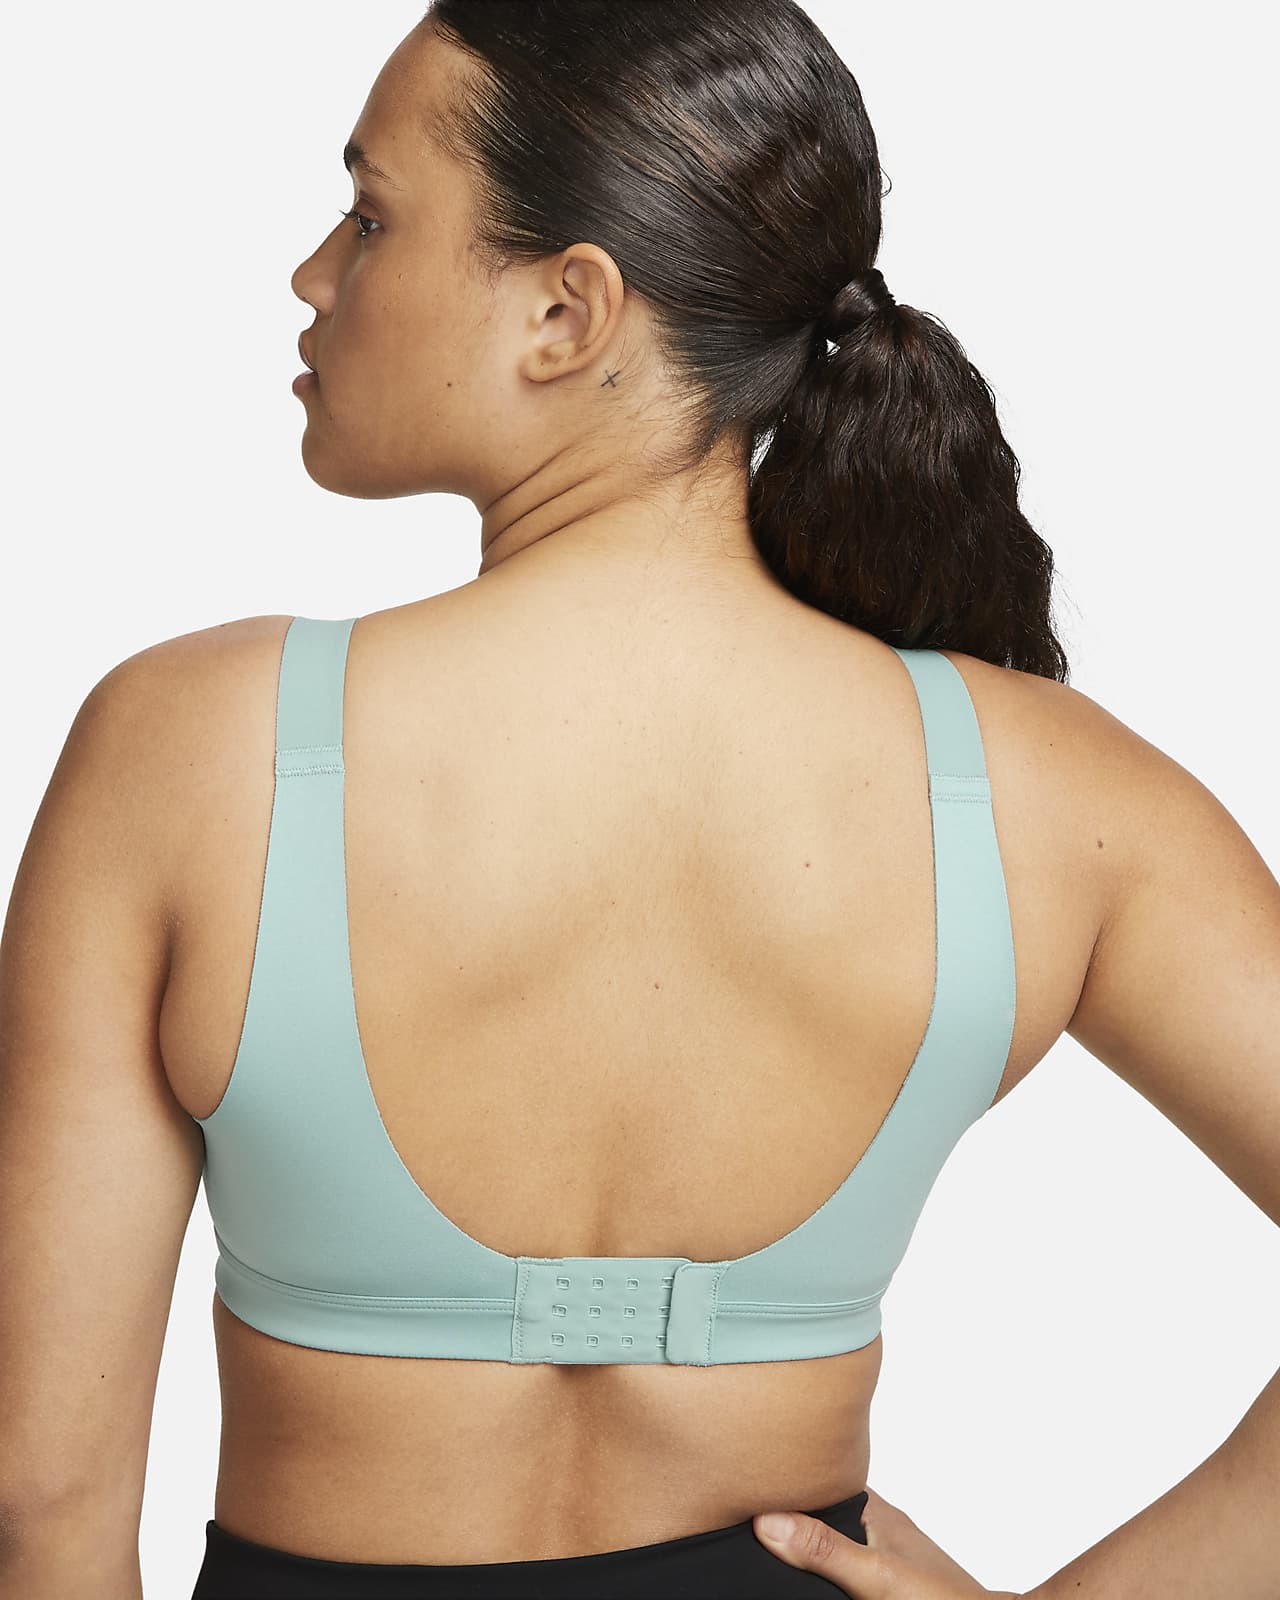 Publicity invade Scorch Nike Alpha Women's High-Support Padded Adjustable Sports Bra. Nike.com